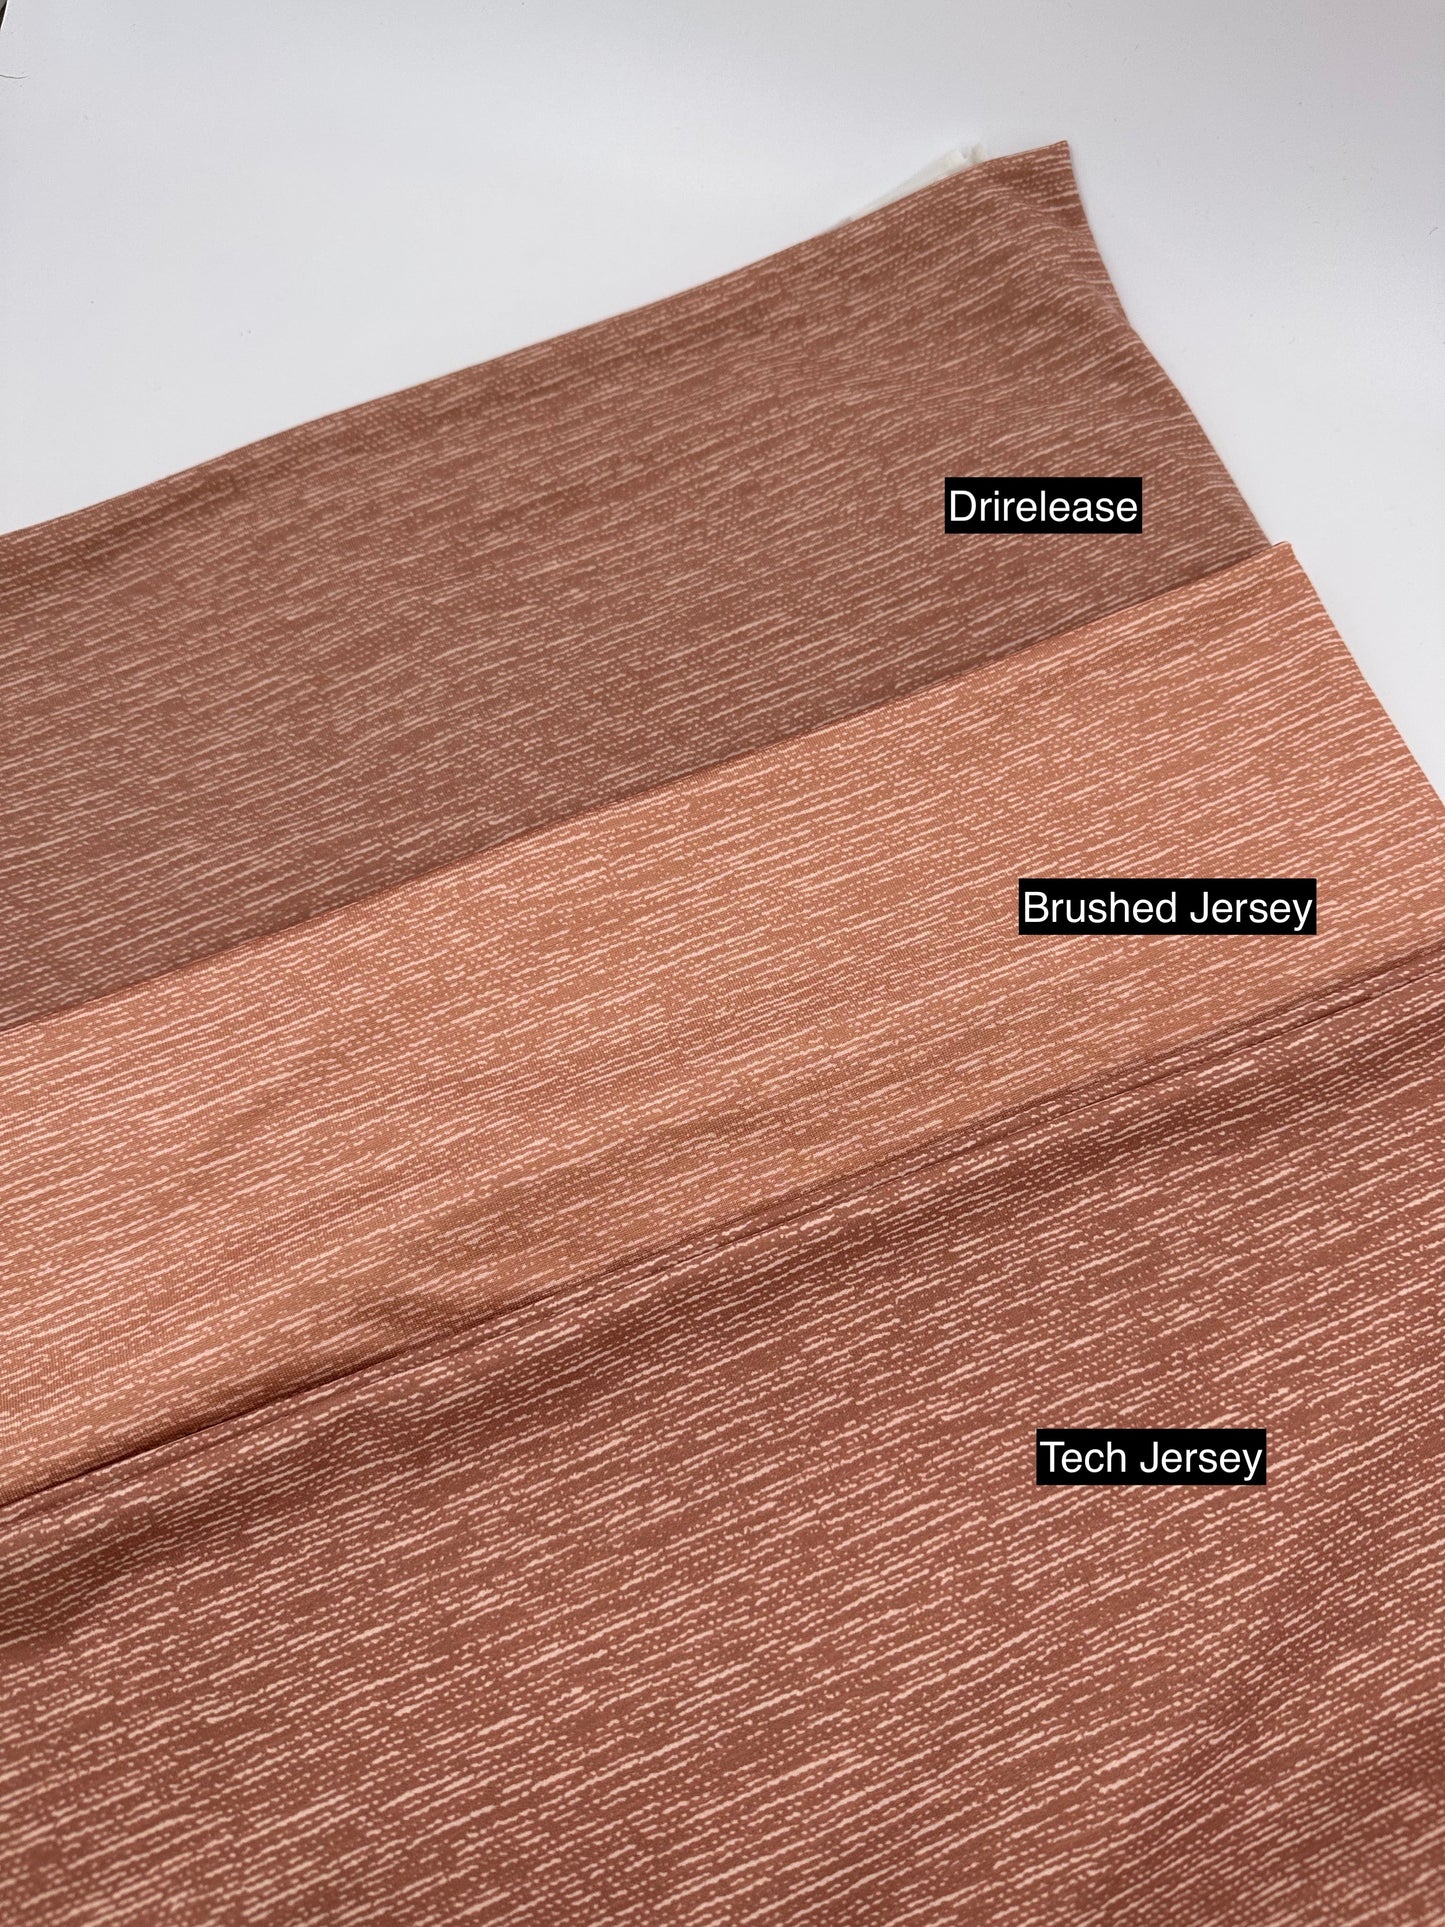 Tech Jersey: Rose Gold Printed Woven Texture